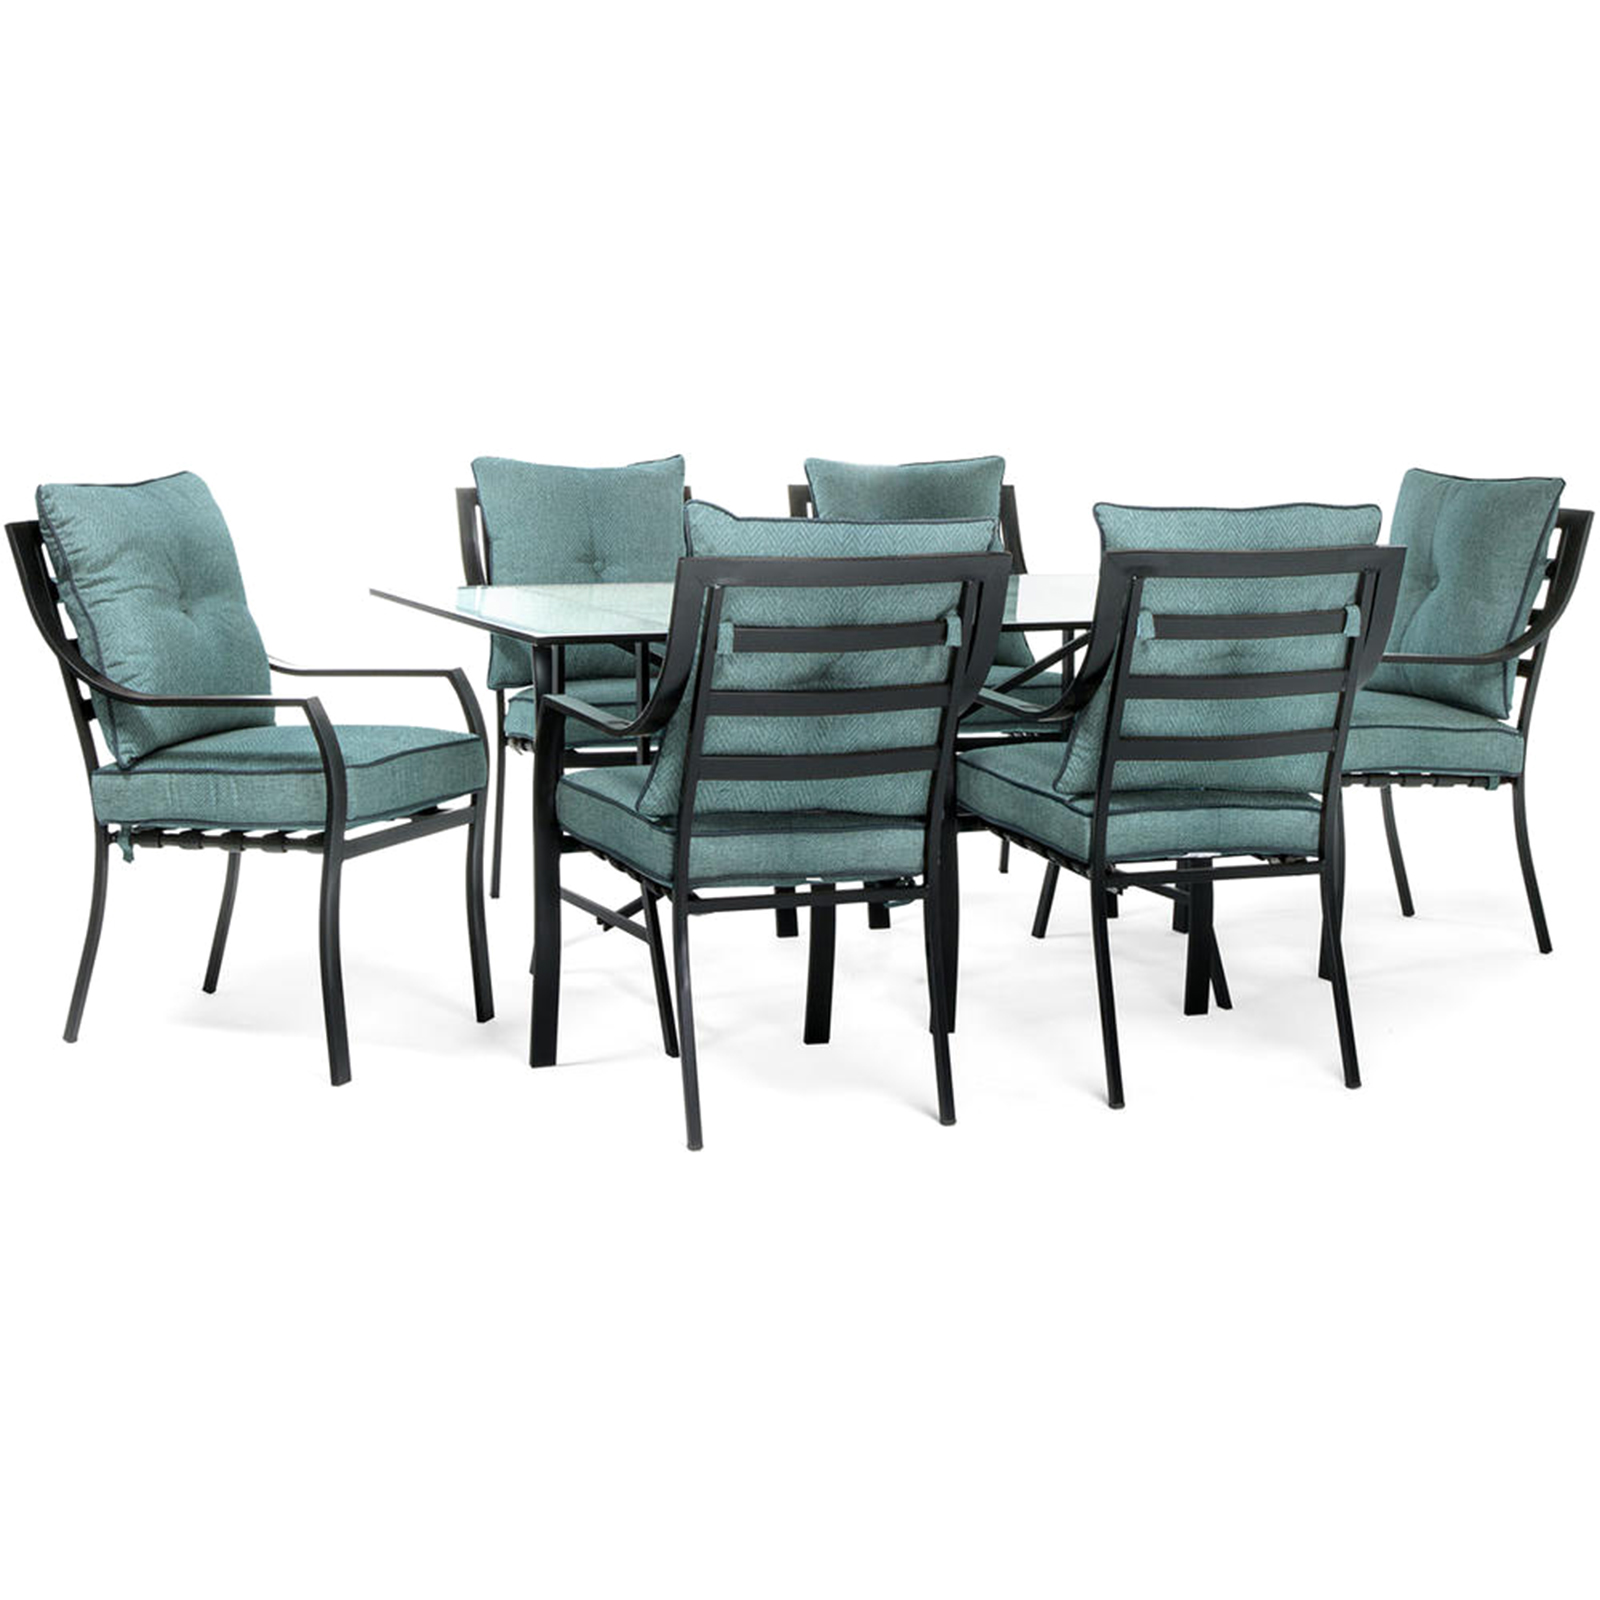 Hanover Lavallette 7pc. Aluminum Outdoor Dining Set with Ocean Blue Cushions - Black